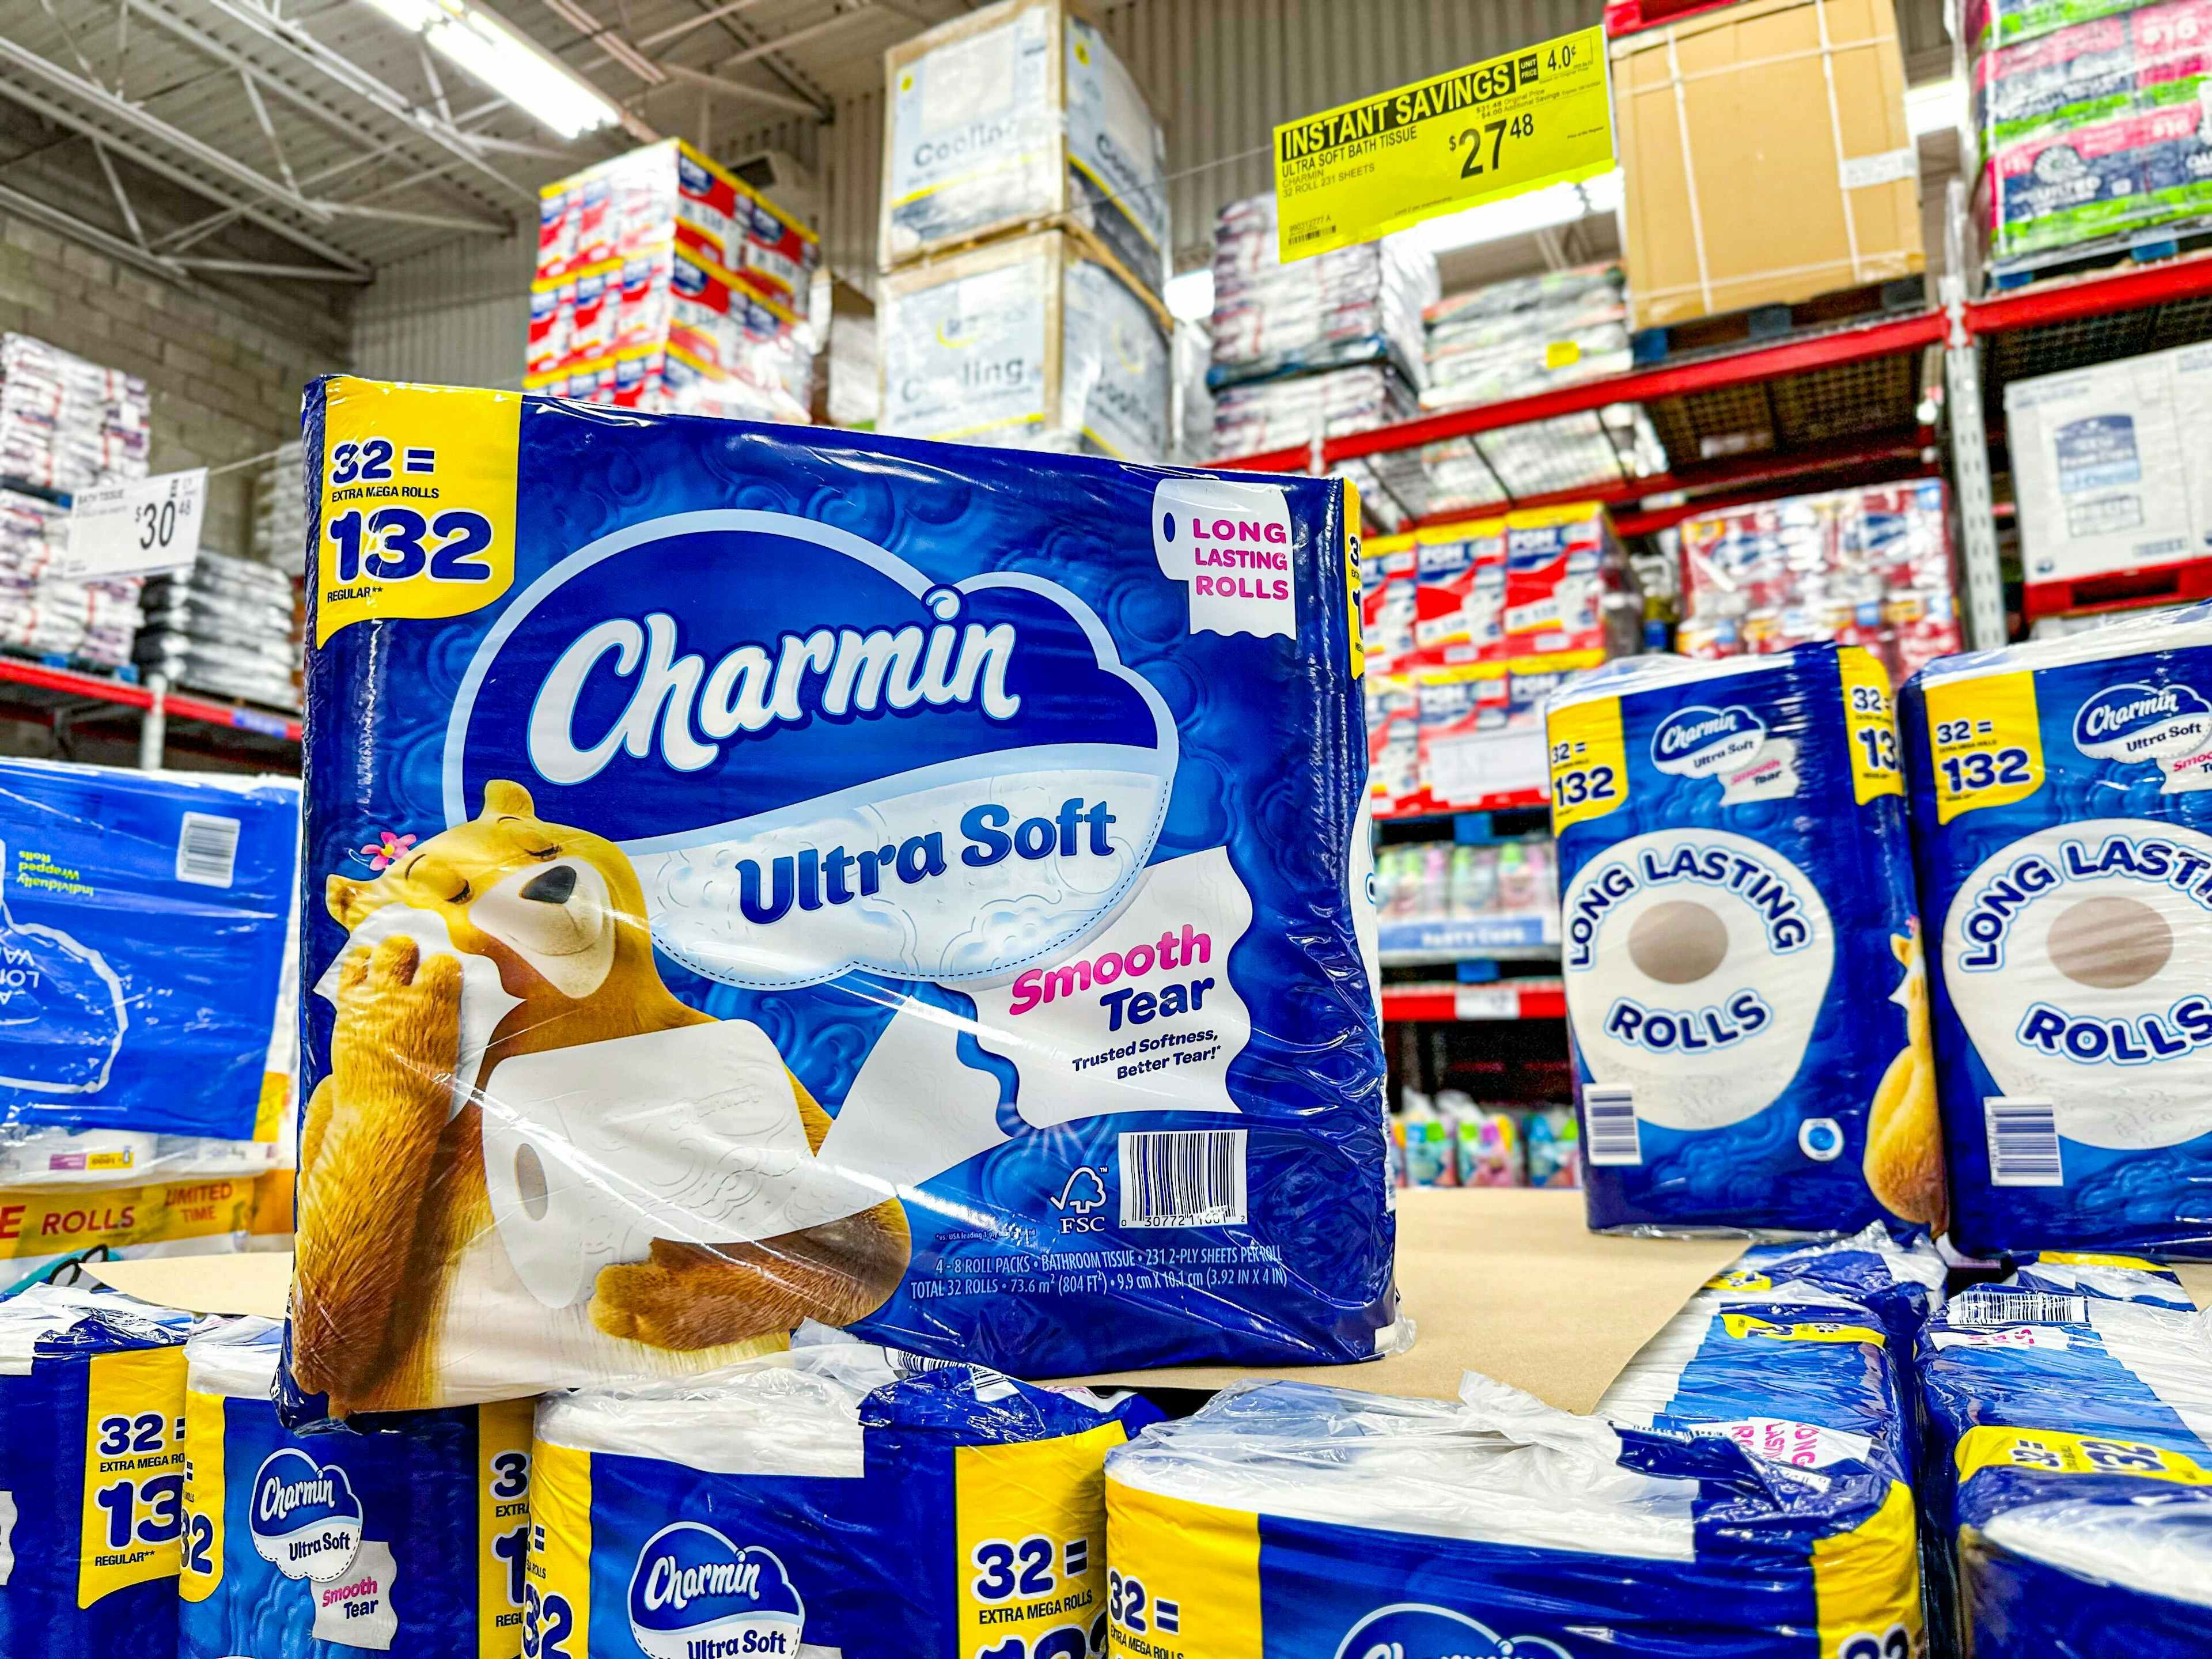 large packs of charmin toilet paper